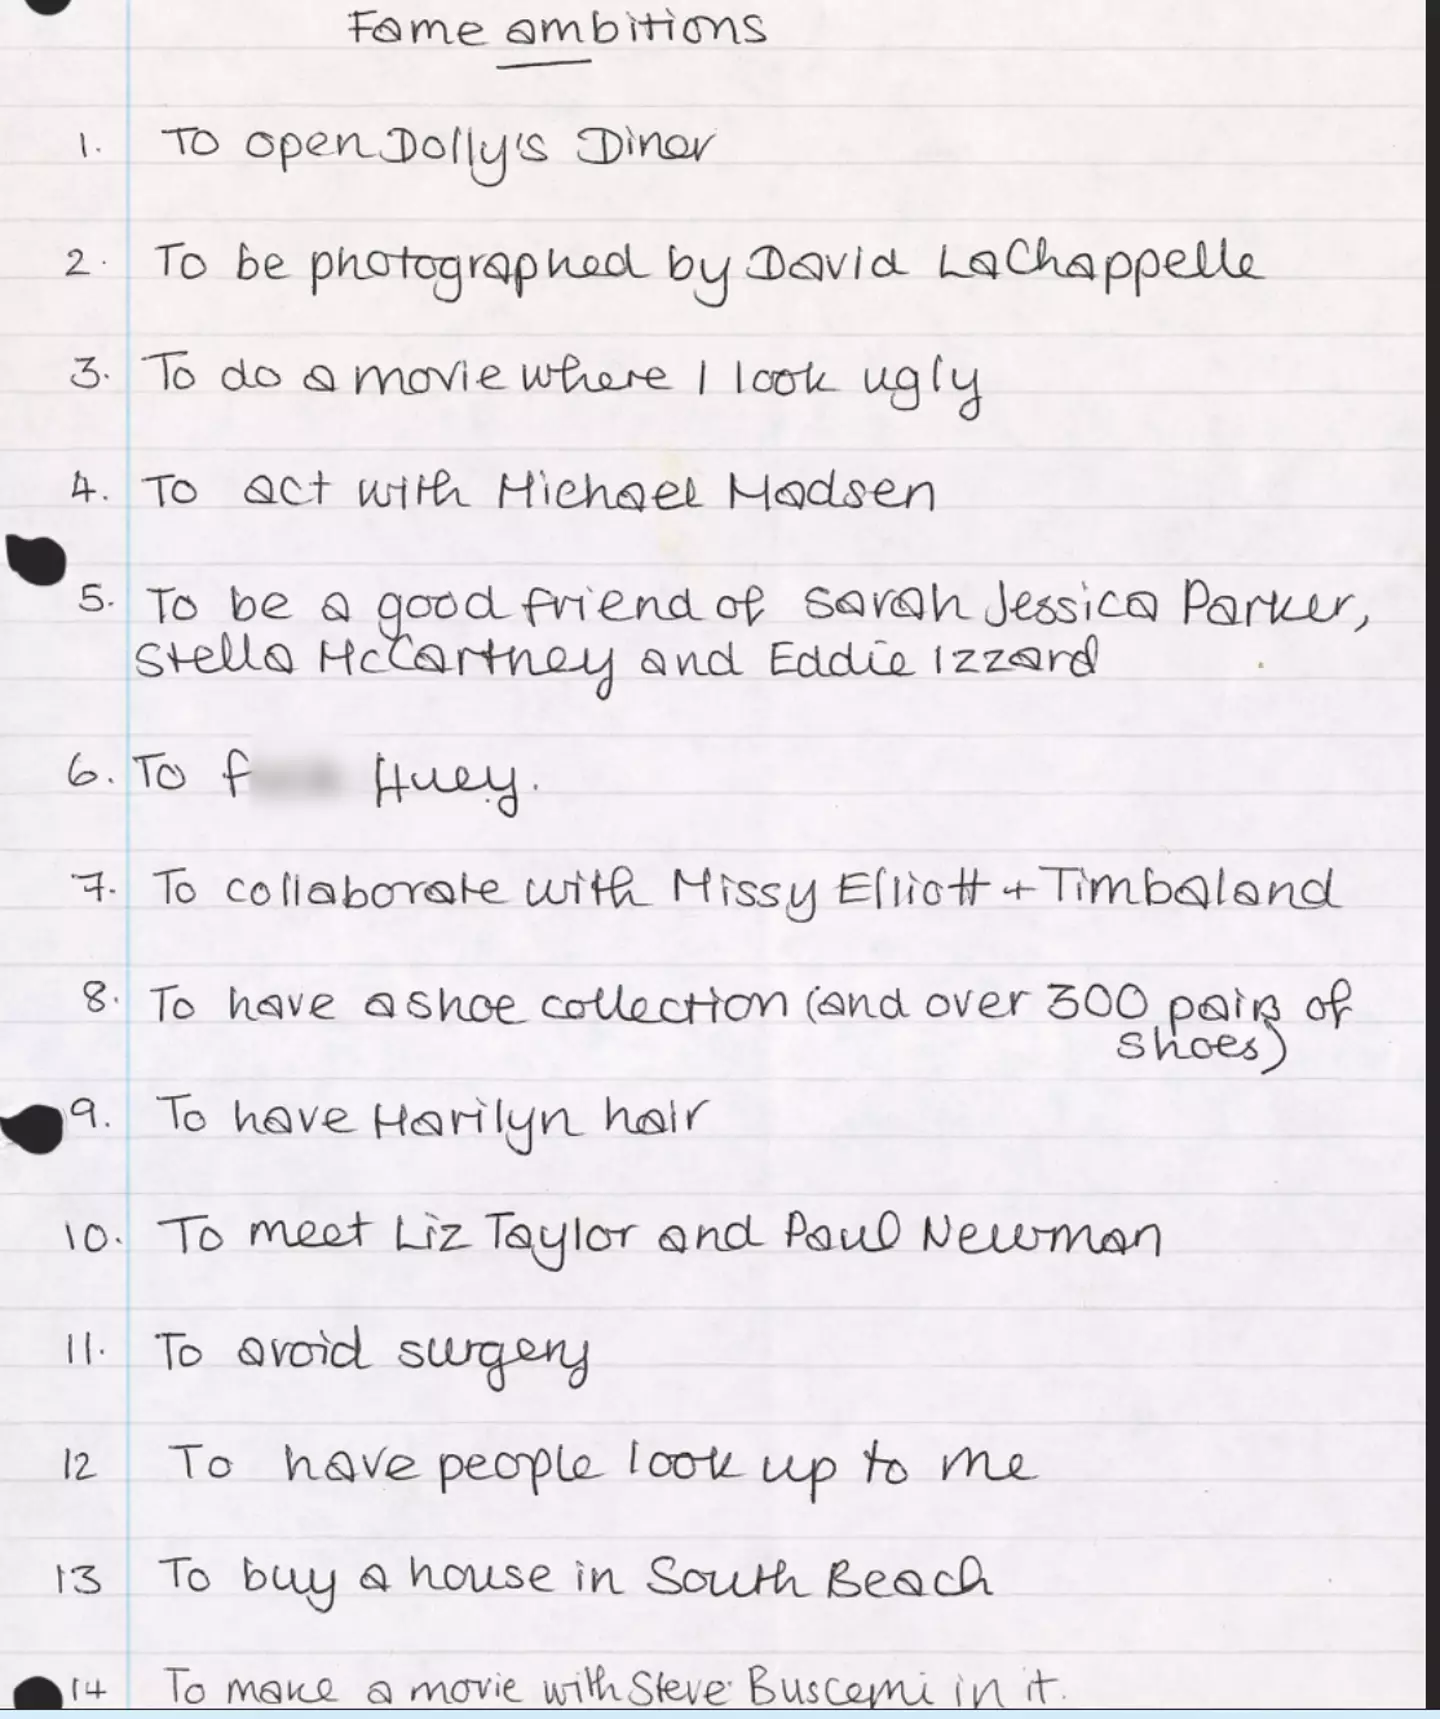 Amy Winehouse's 'Fame Ambitions' list